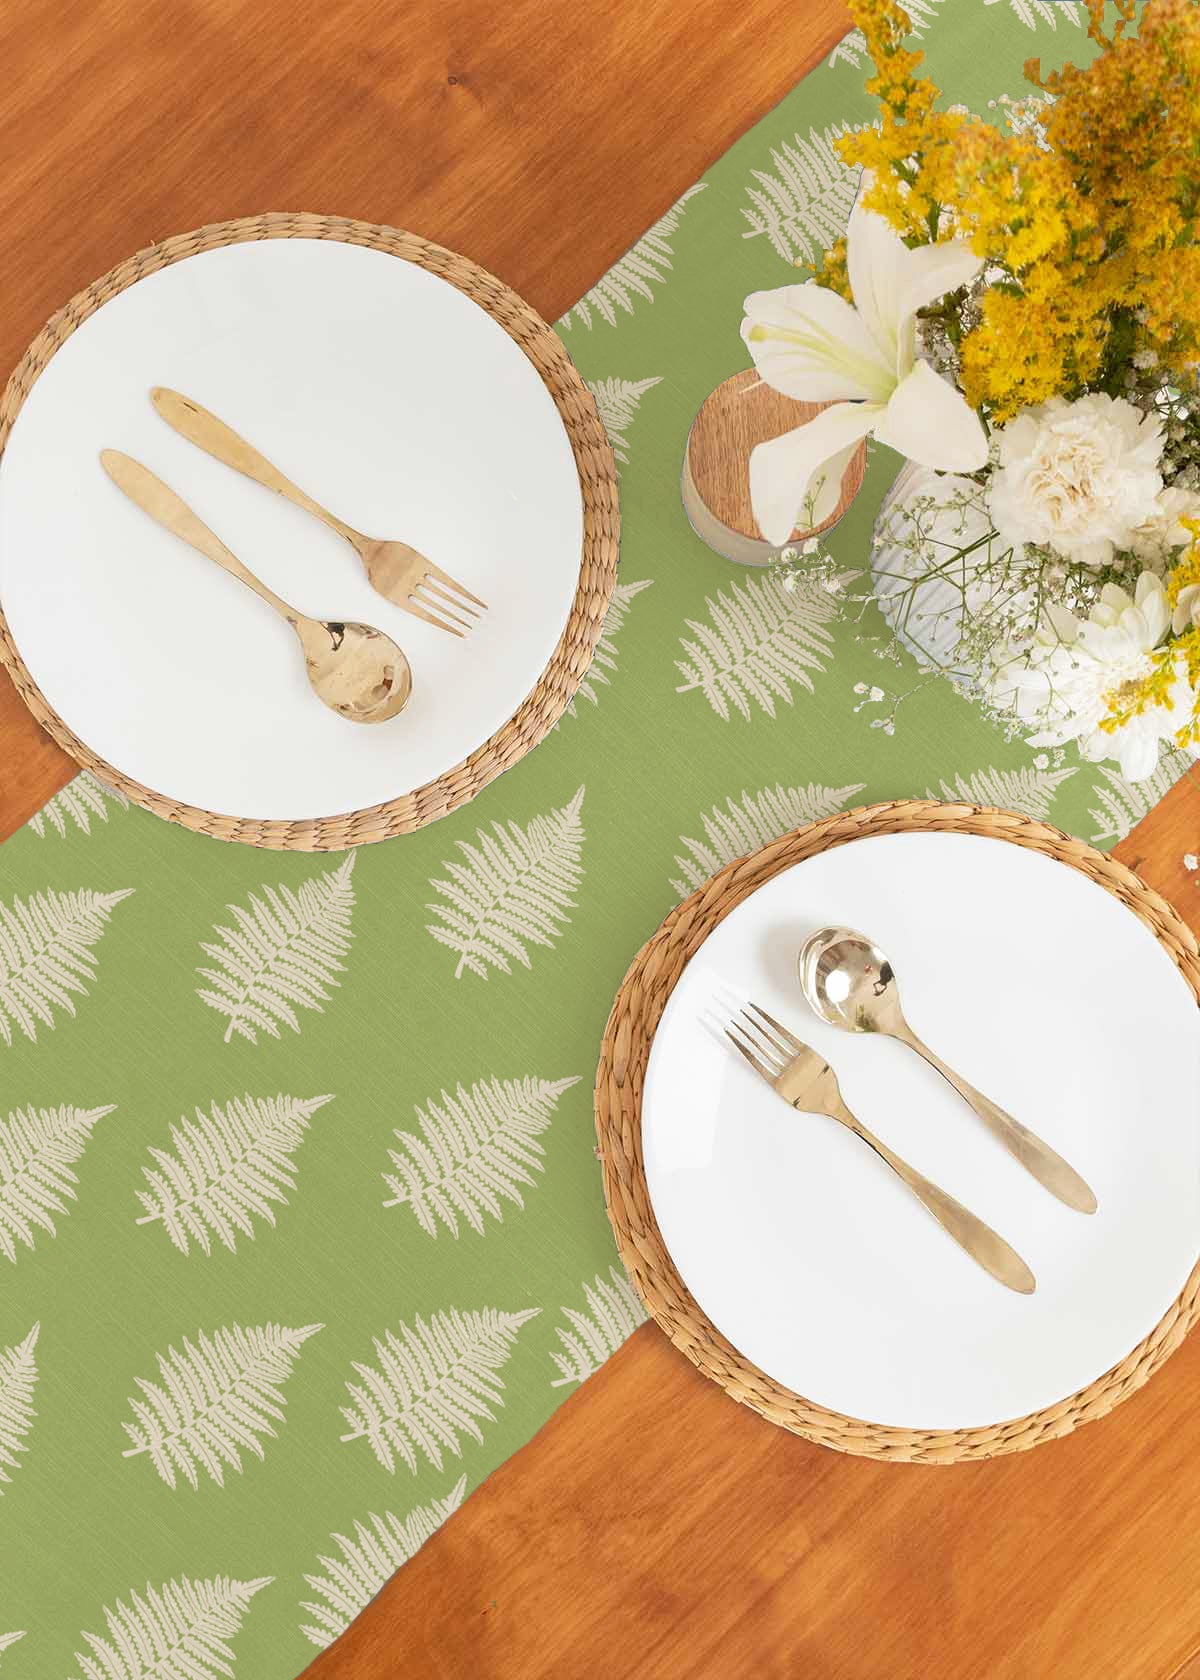 Ferns Printed Cotton Table Runner - Green